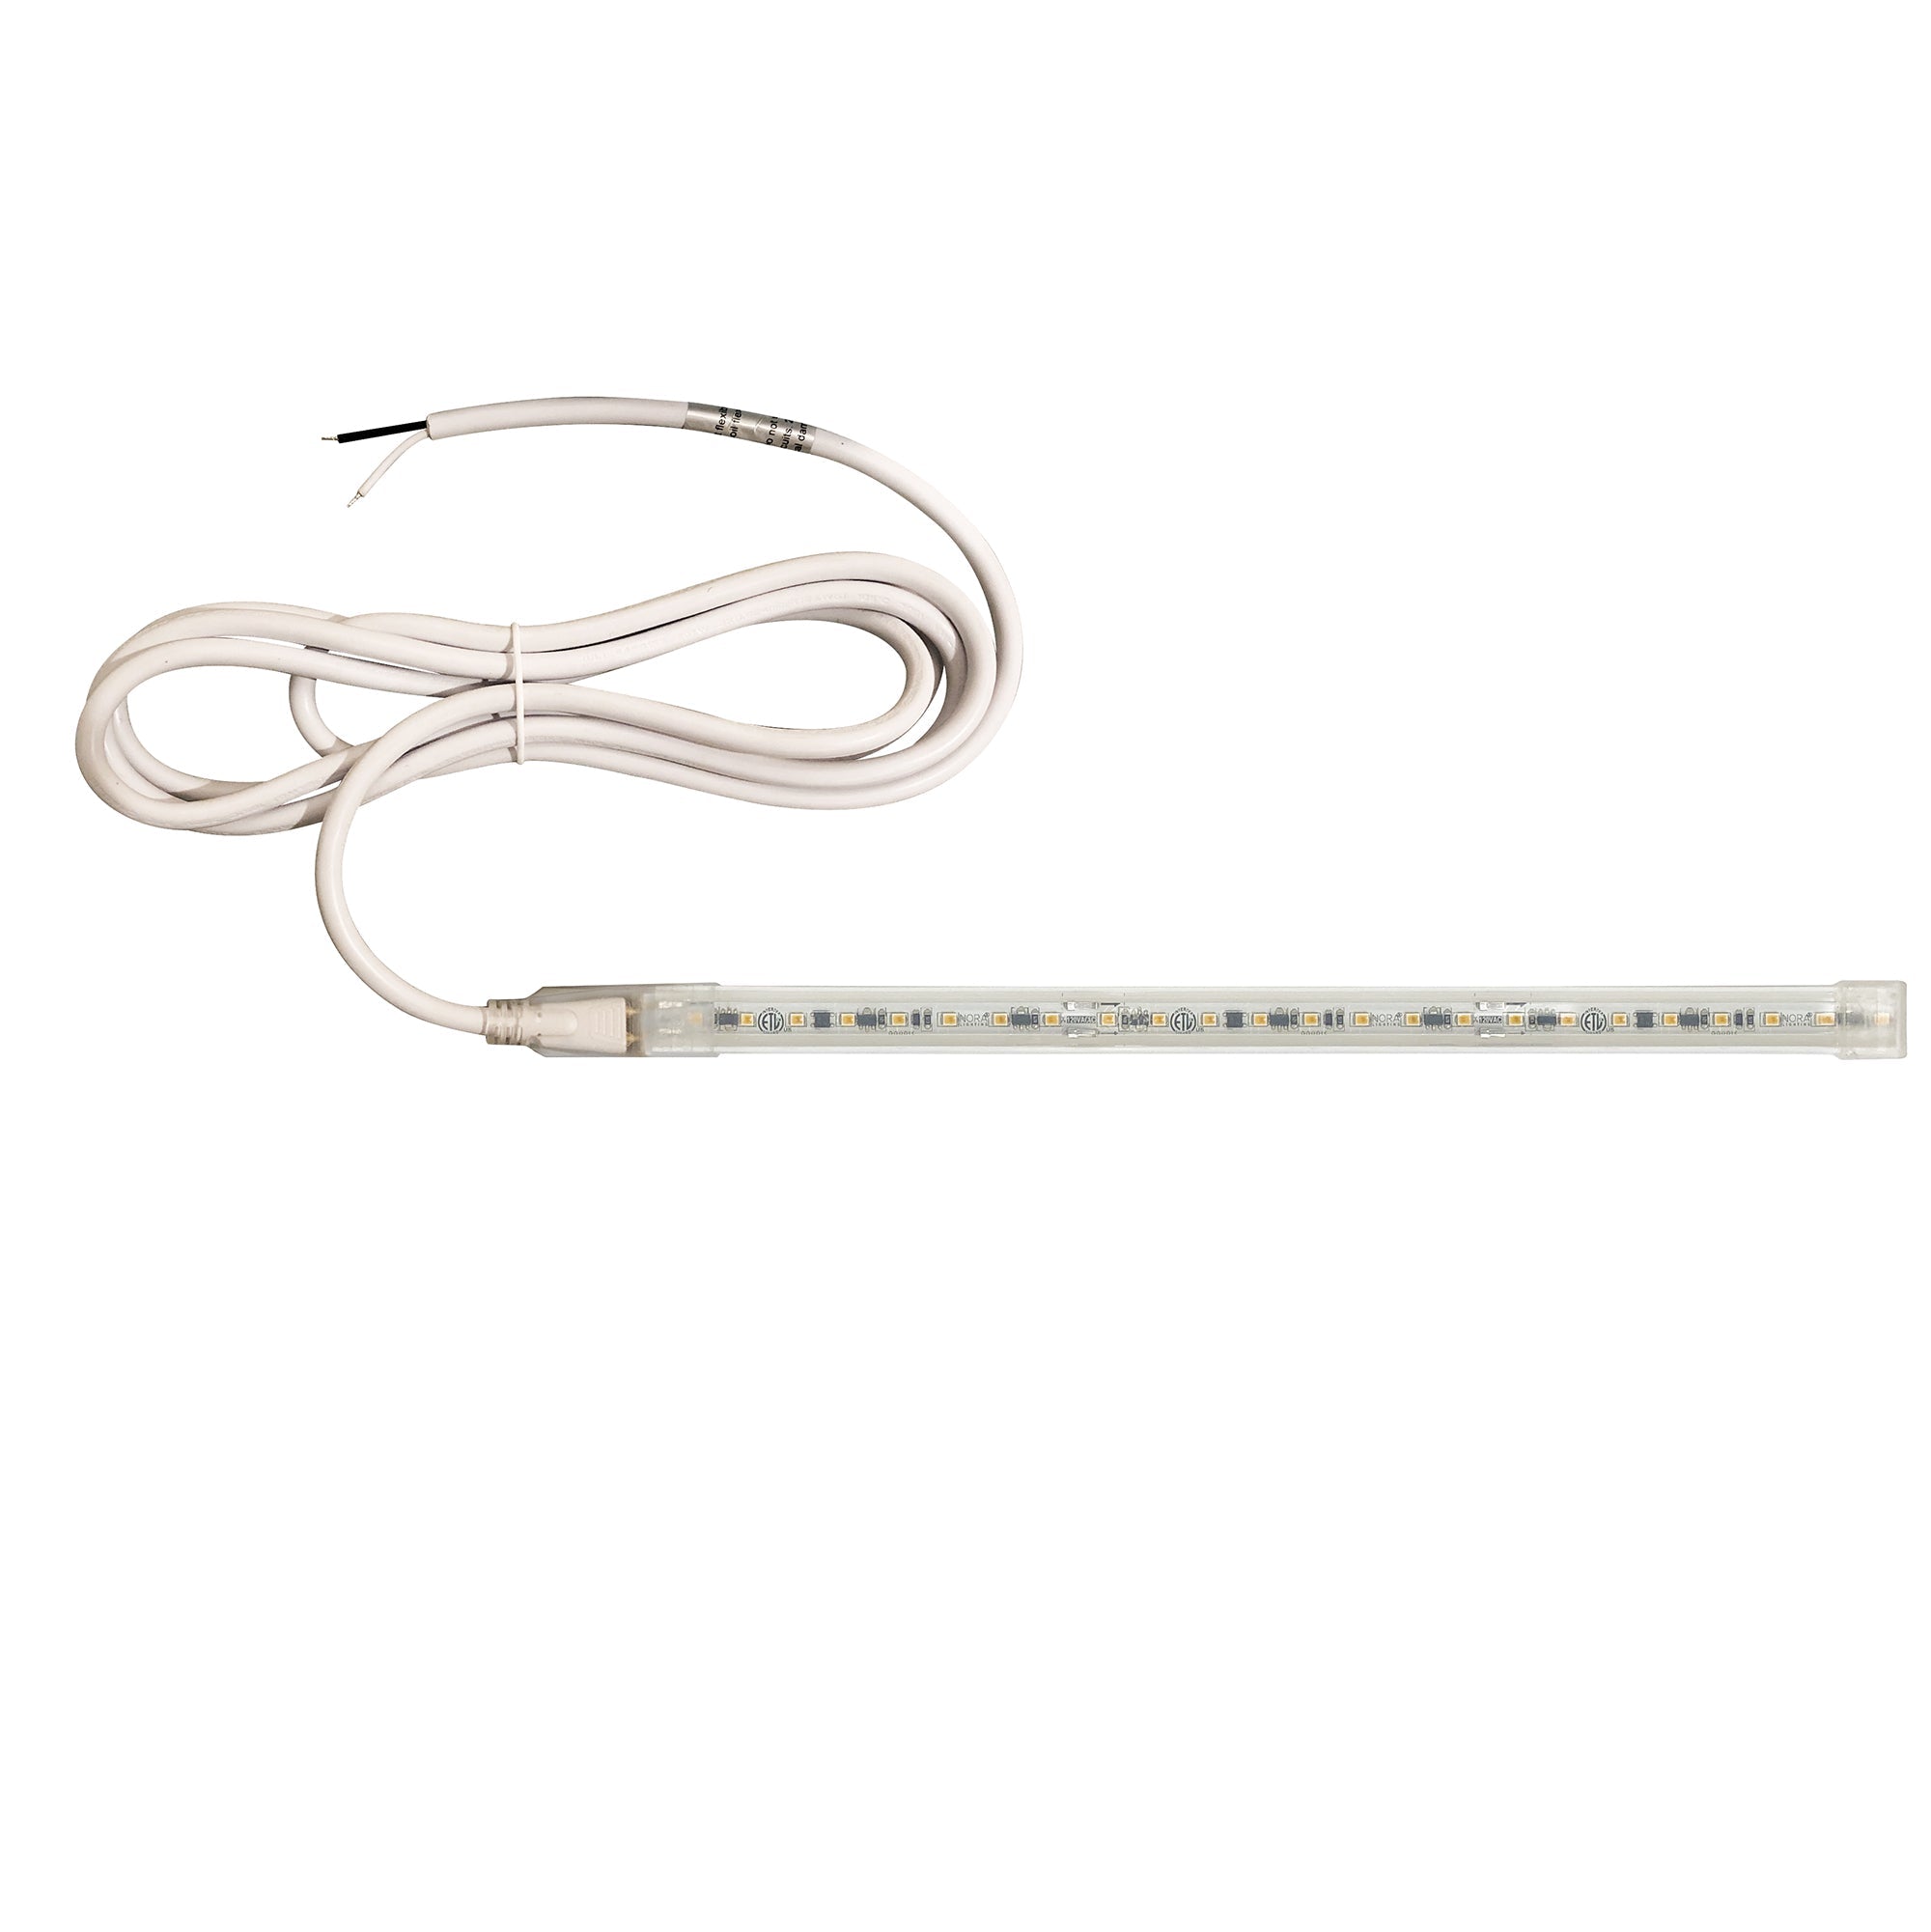 Nora Lighting NUTP13-W48-12-930/HW - Accent / Undercabinet - Custom Cut 48-ft 120V Continuous LED Tape Light, 330lm / 3.6W per foot, 3000K, w/ Mounting Clips and 8' Hardwired Power Cord